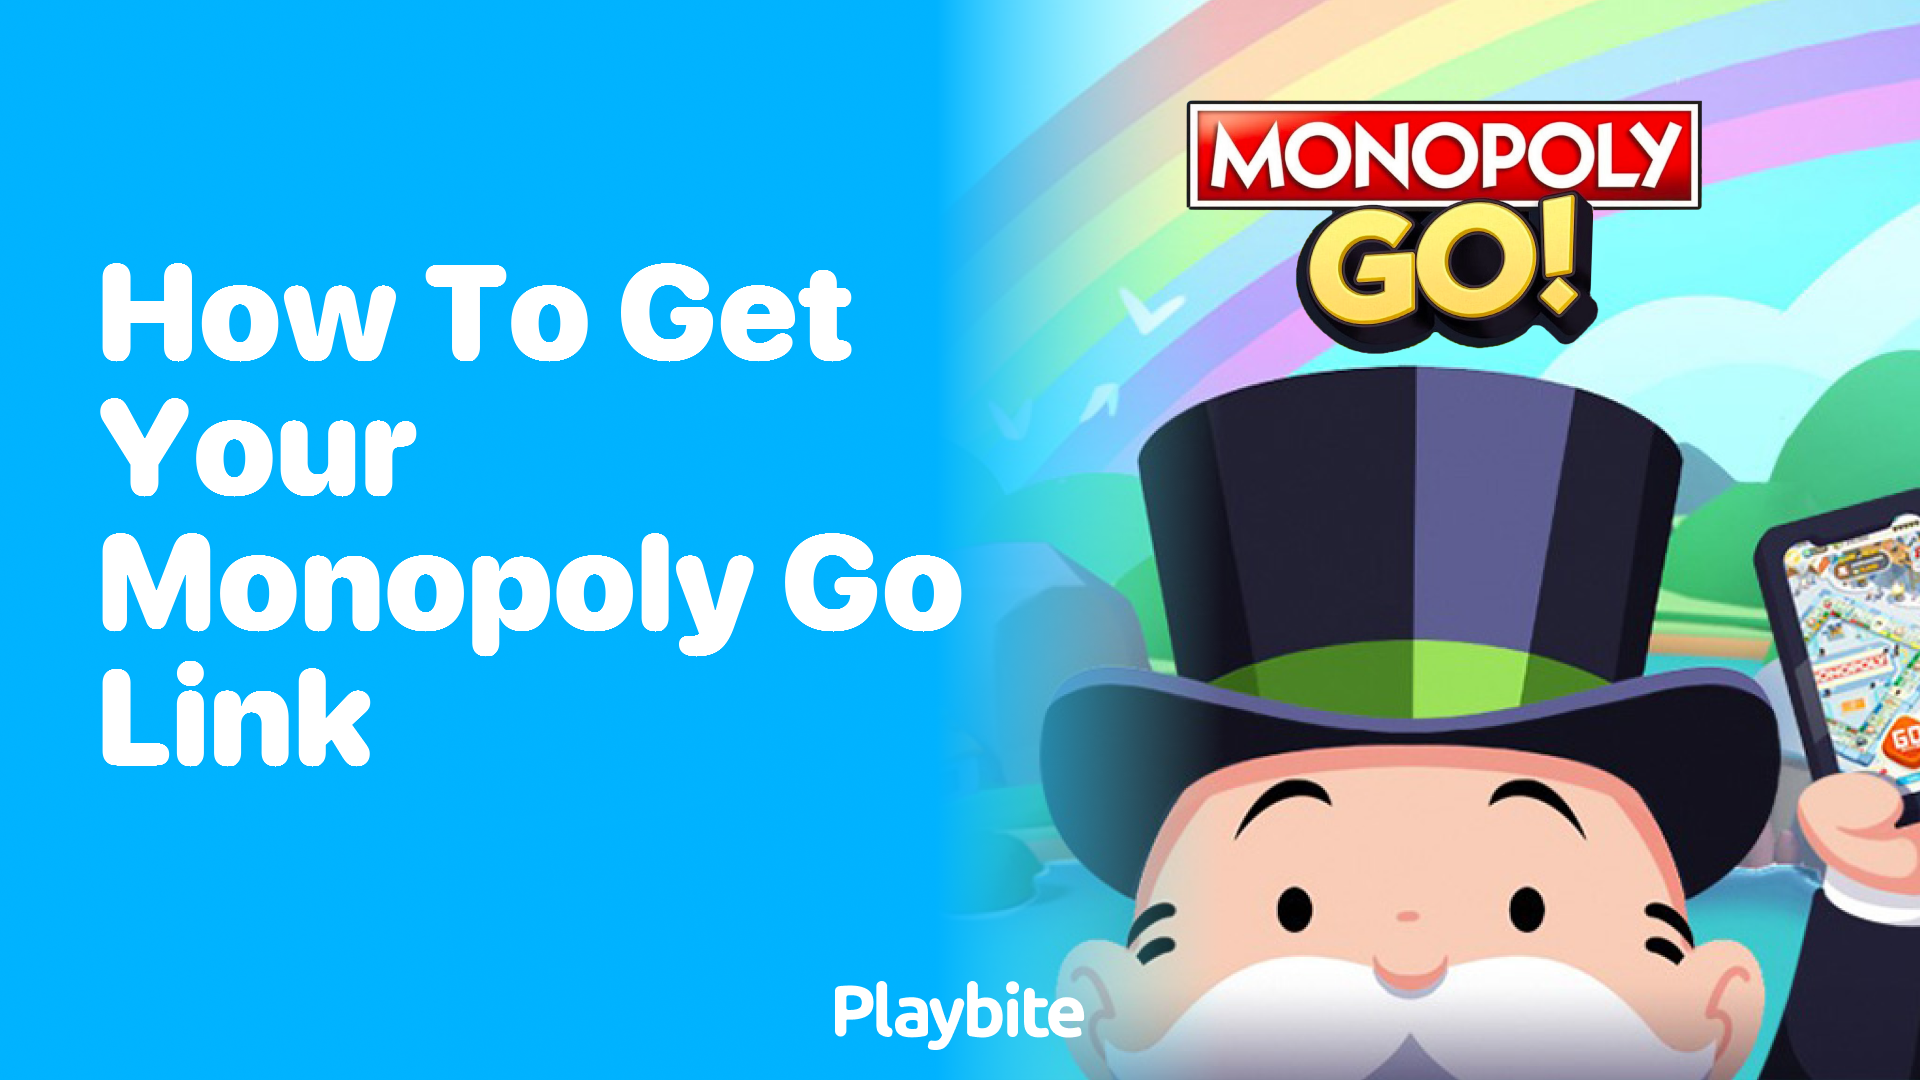 How to Get Your Monopoly Go Link